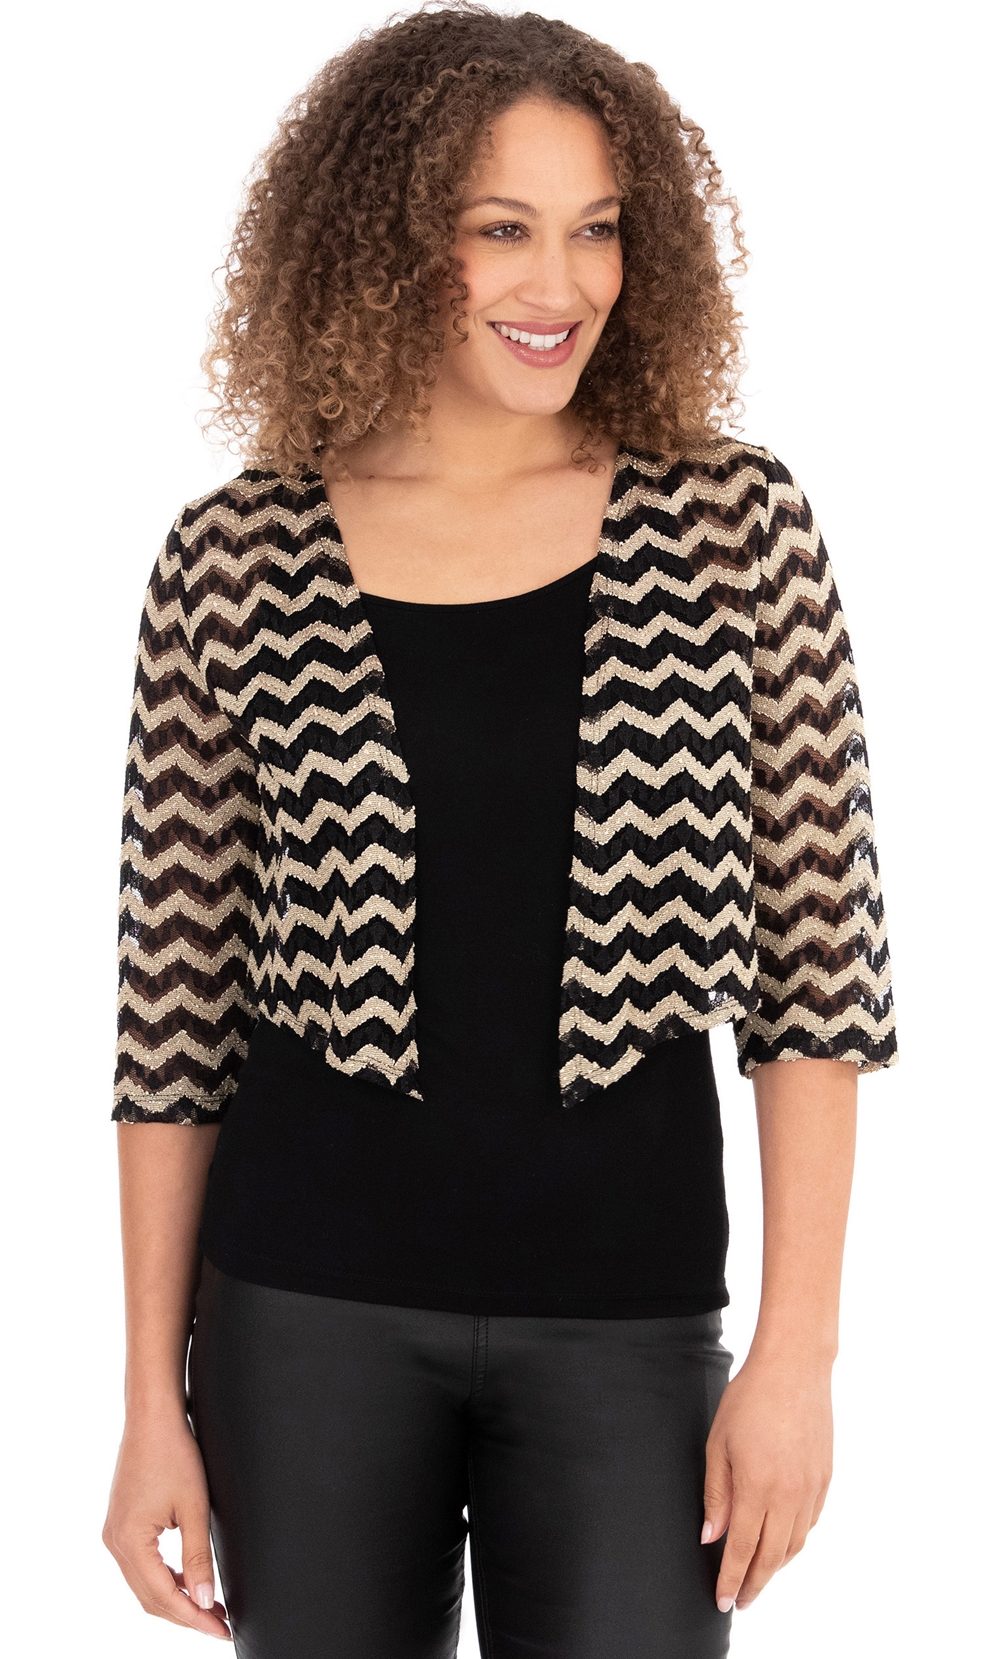 Zig Zag Lace Open Cover Up